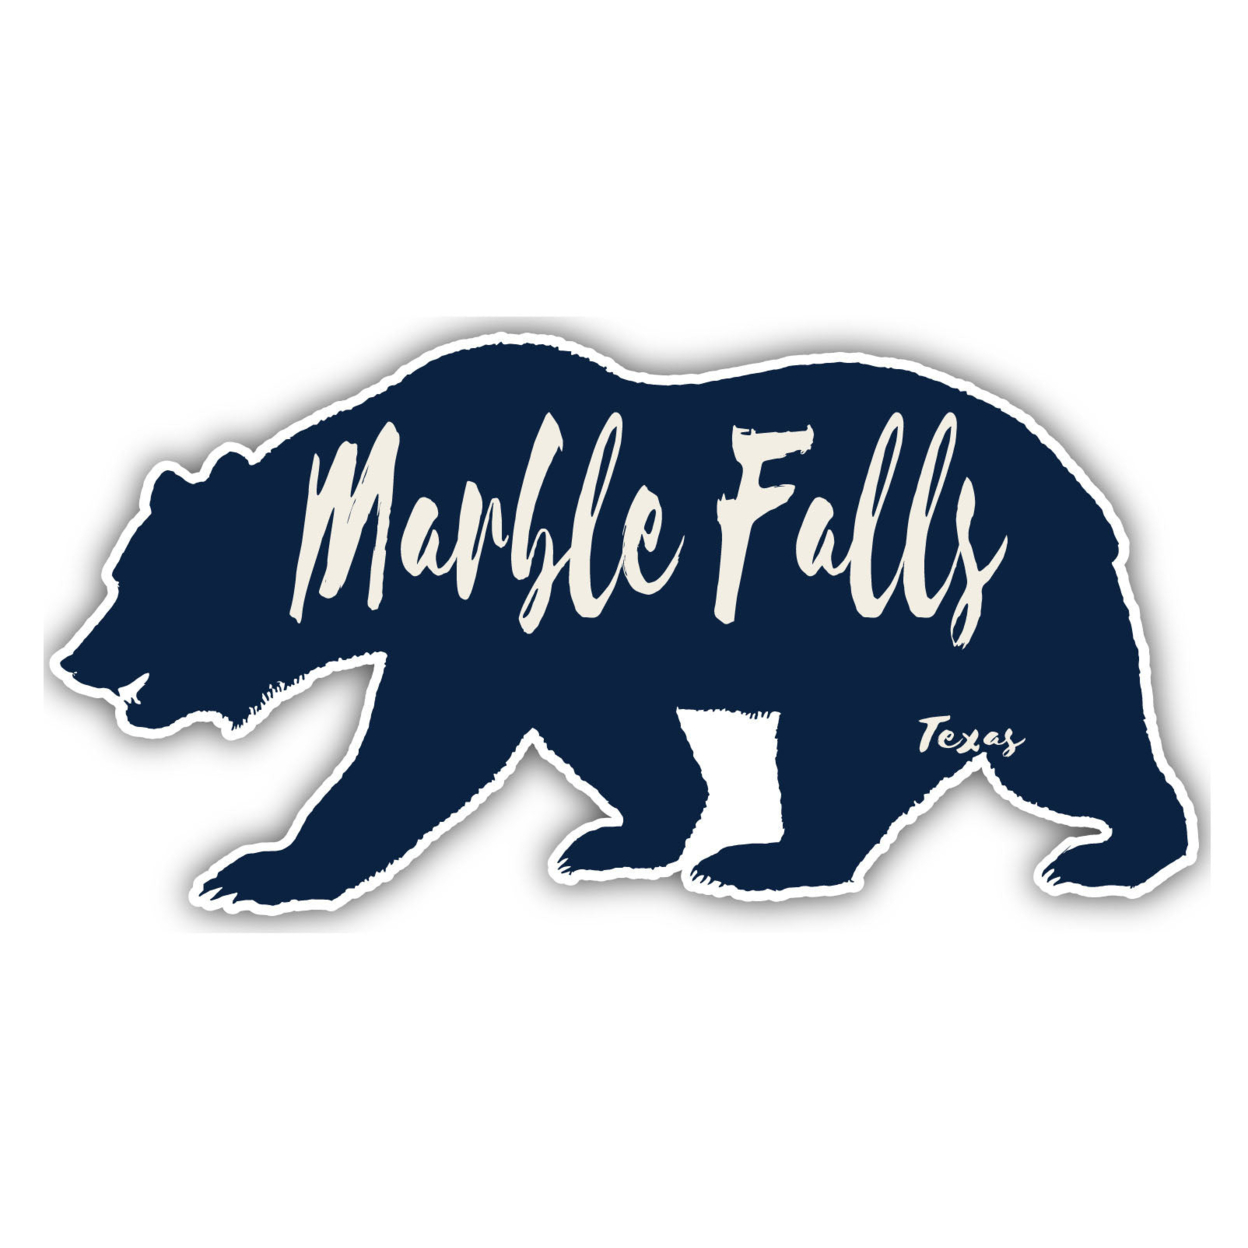 Marble Falls Texas Souvenir Decorative Stickers (Choose Theme And Size) - 2-Inch, Camp Life